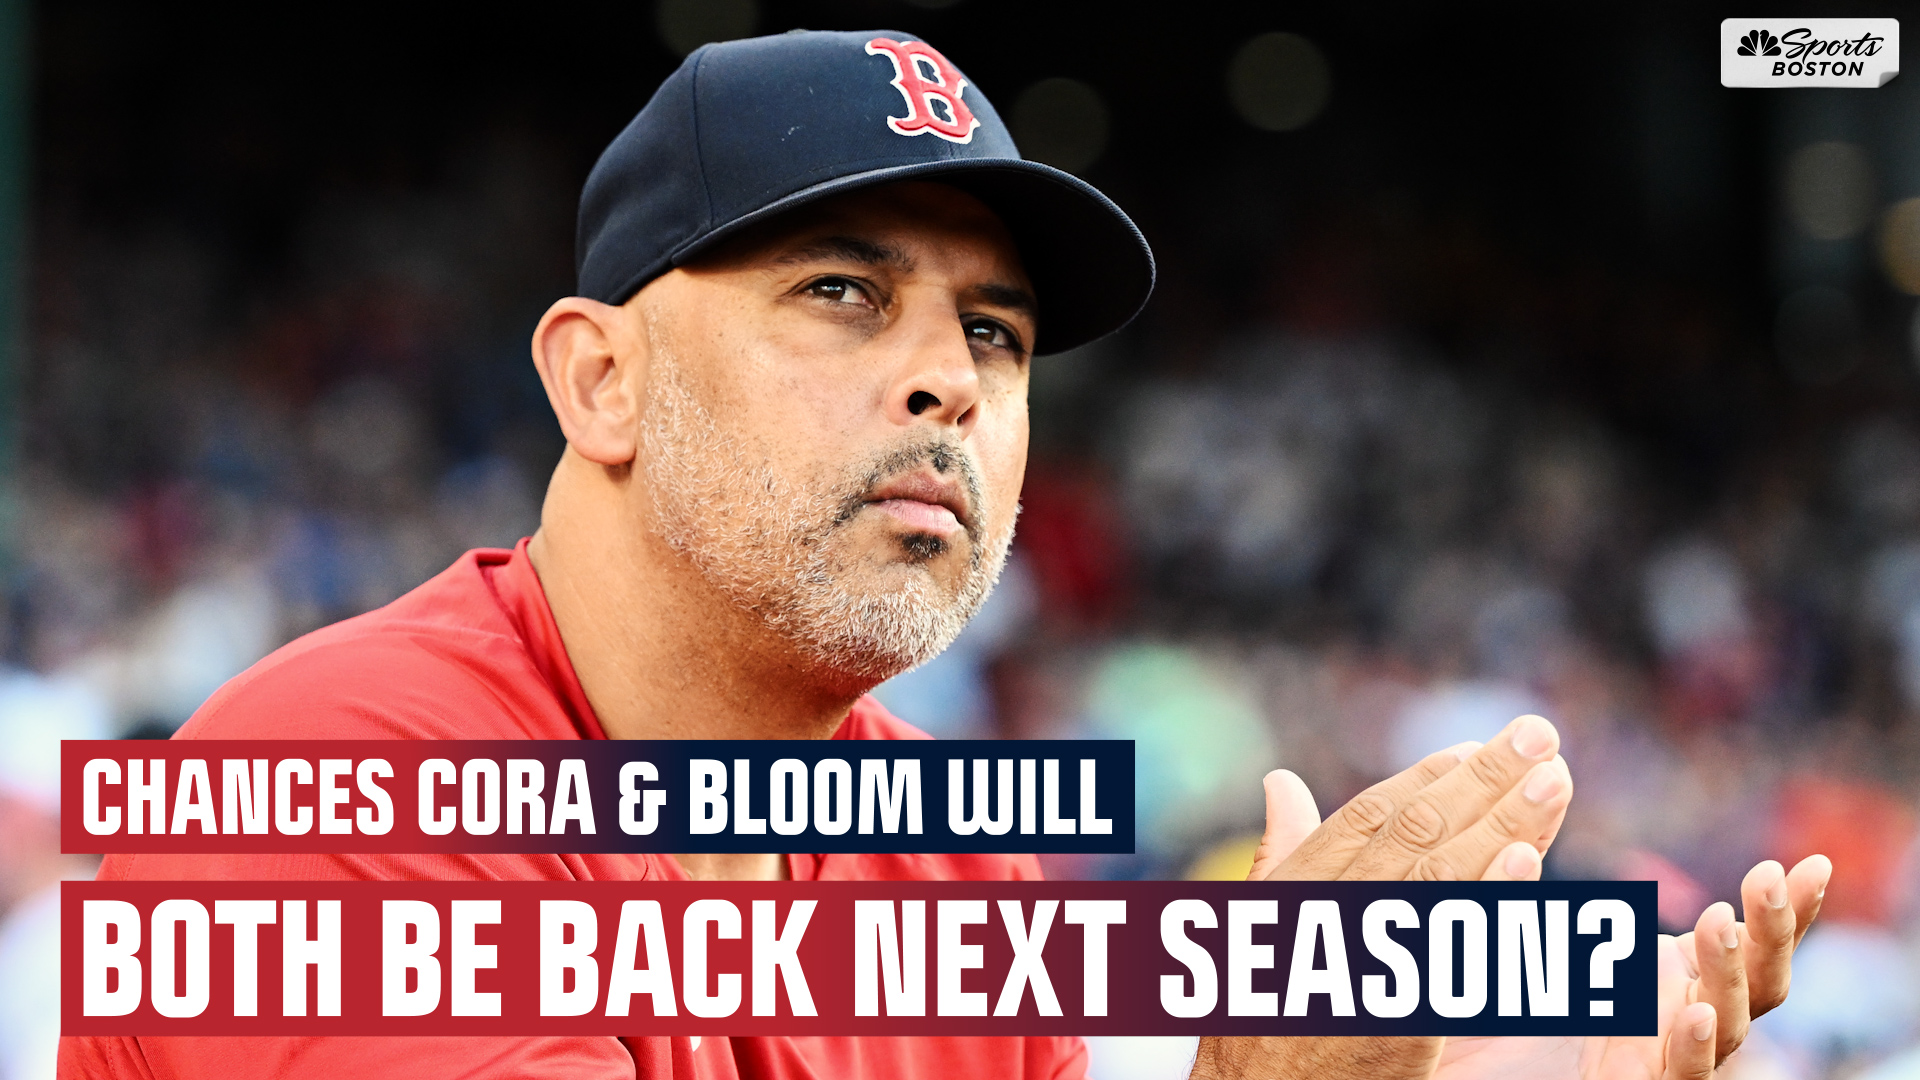 Tomase “not convinced” Bloom and Cora will both be back next year – NBC  Sports Boston